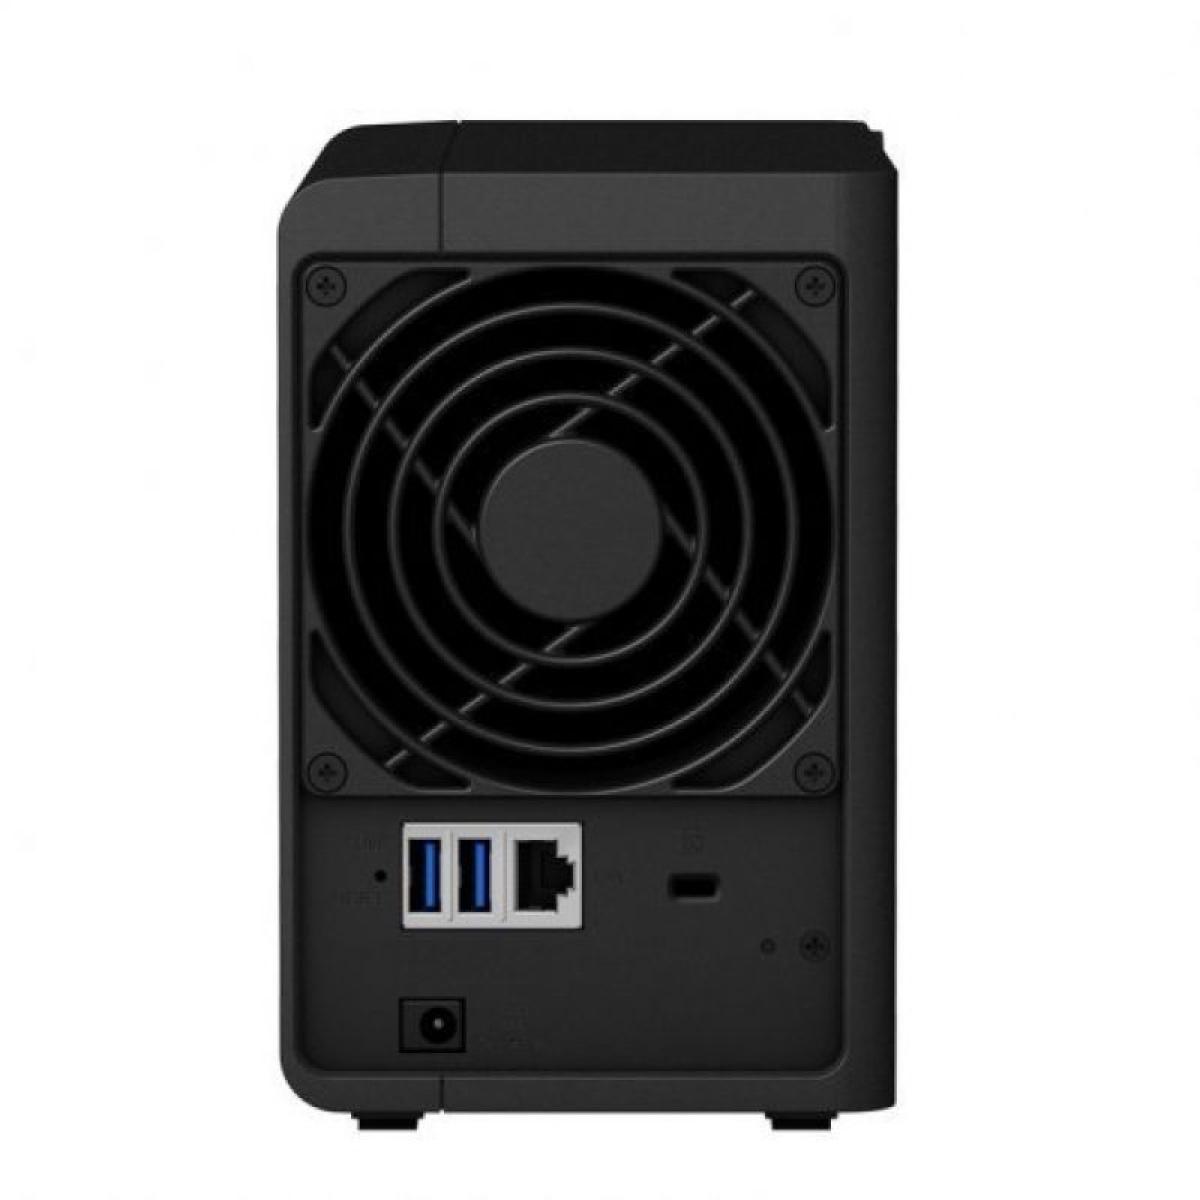 NAS SYNOLOGY DISKSTATION DS218/ 2 BAHIAS 3.5"- 2.5"/ 2GB DDR4/ FORMATO TORRE